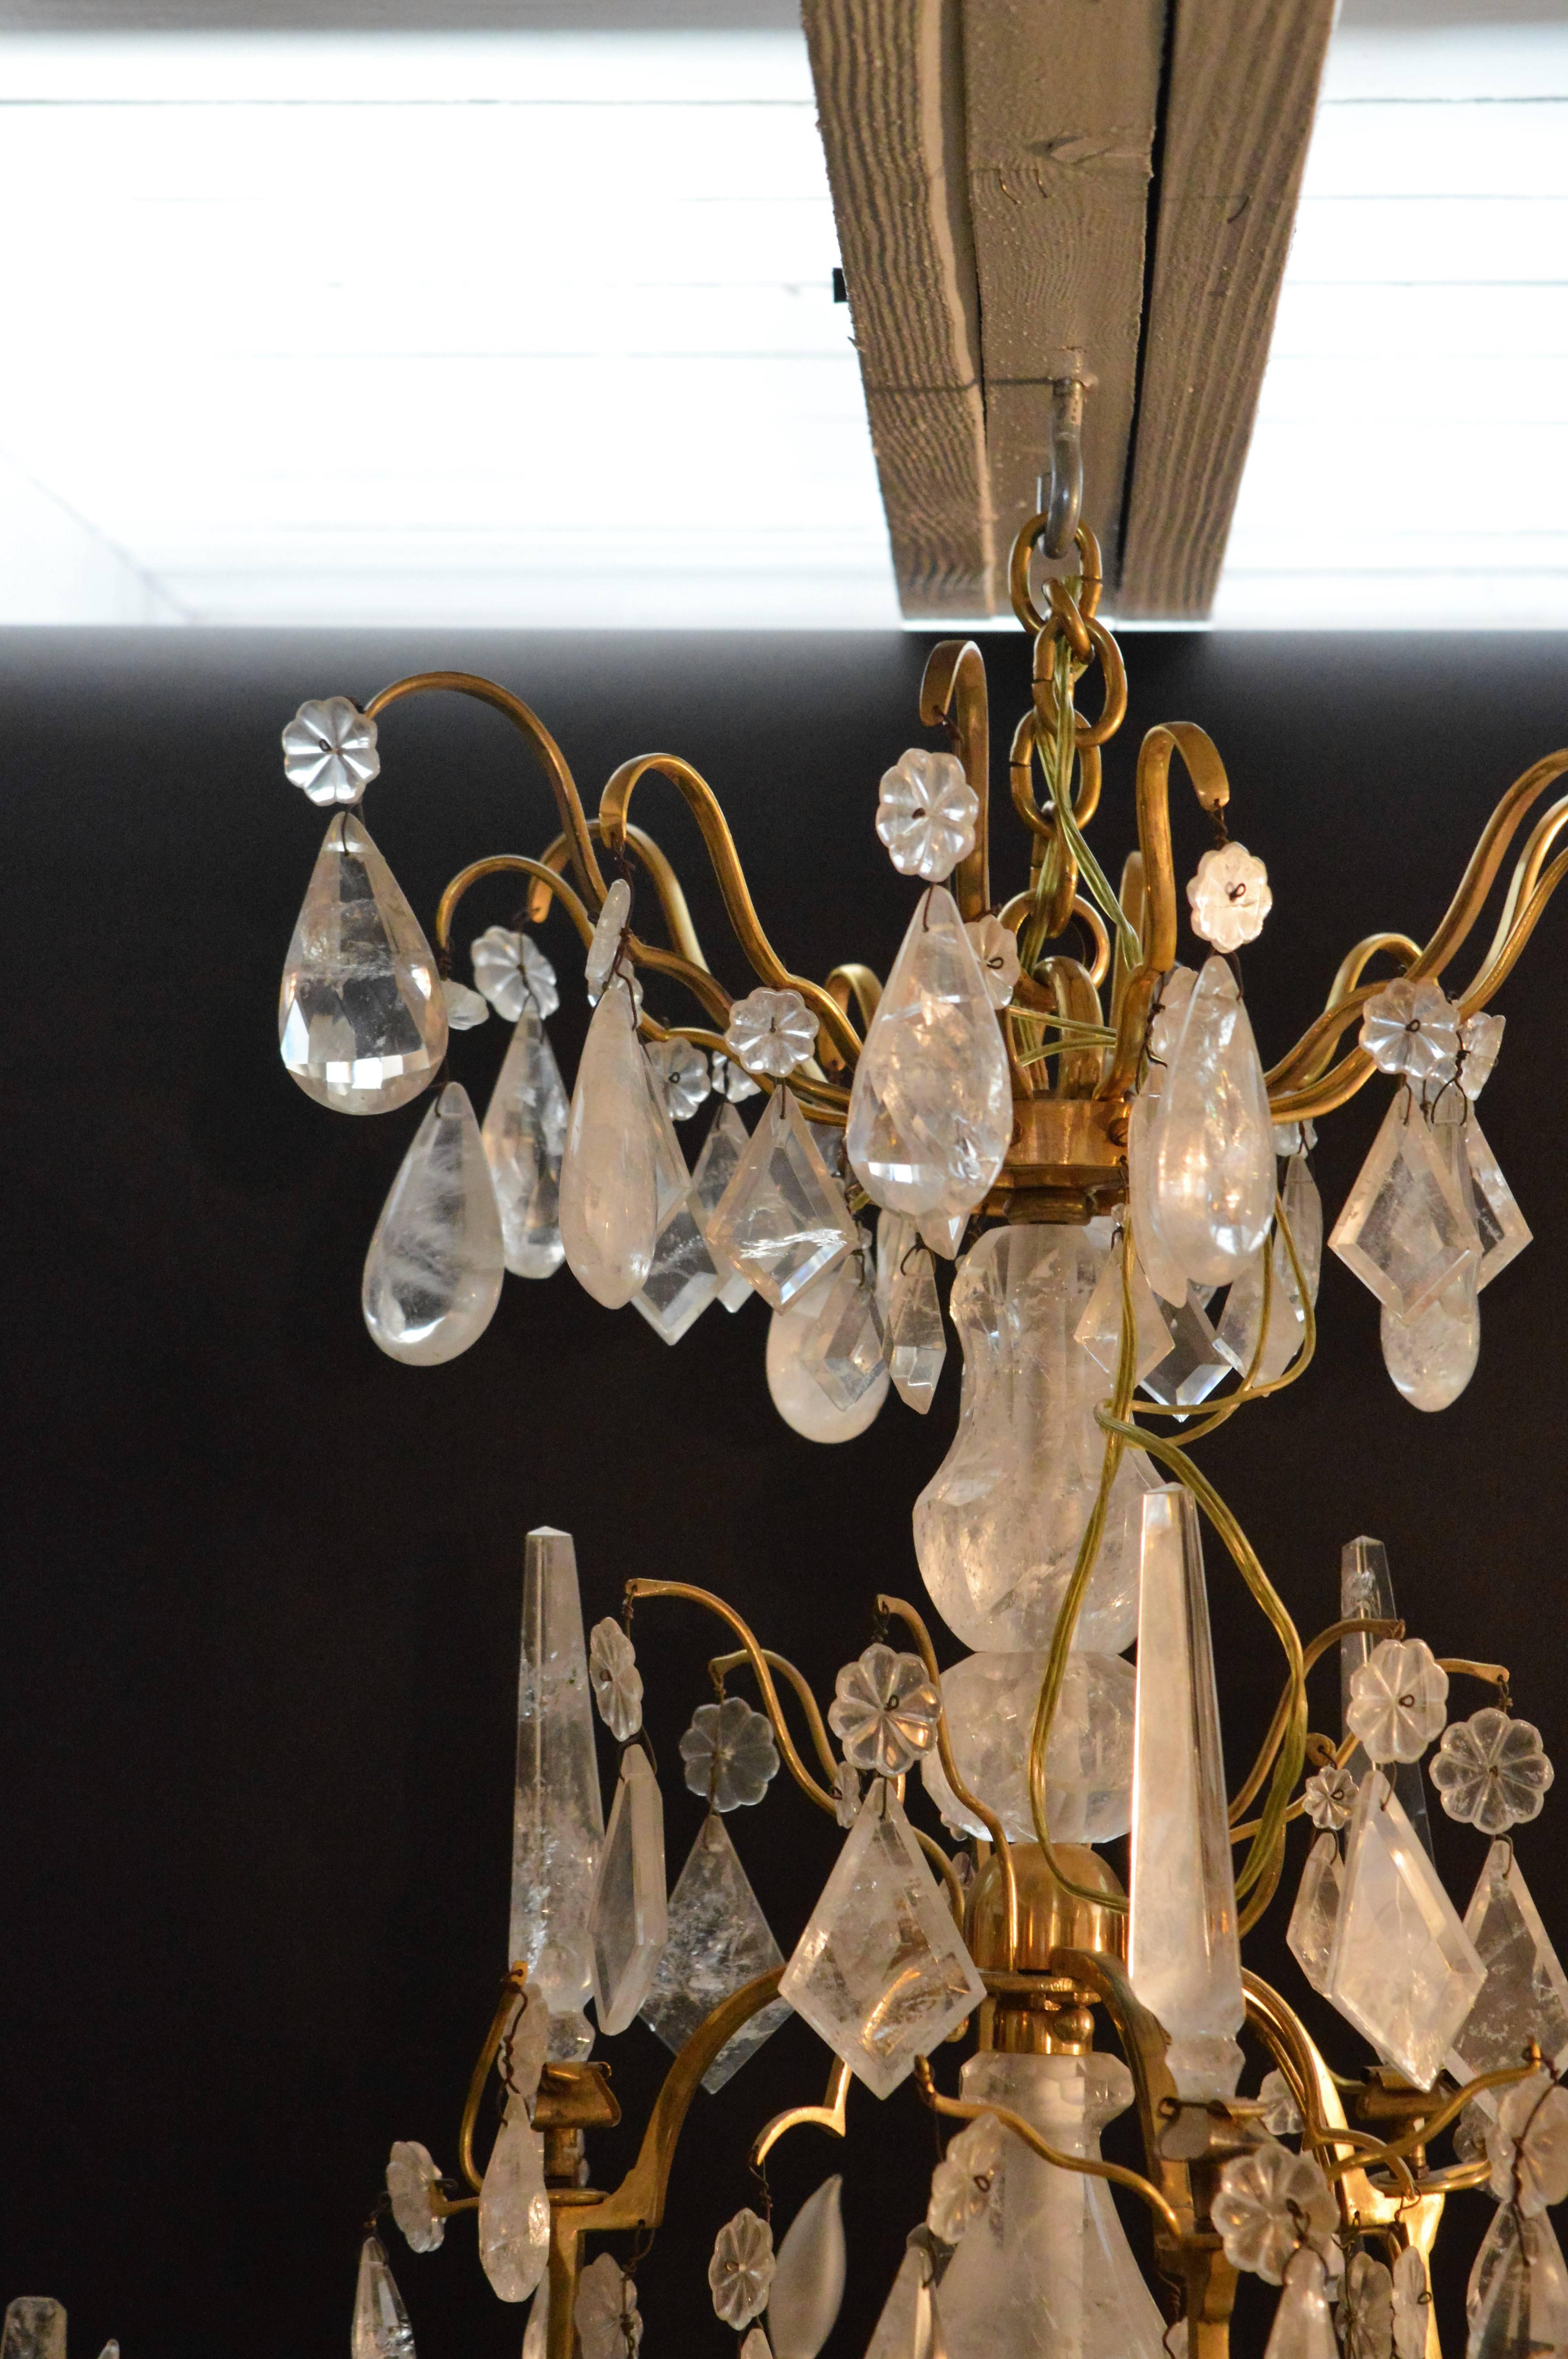 Early 20th century nine-light bronze rock crystal chandelier. The center of the chandelier is all rock crystal and adorned with beautiful rock crystal pendants.